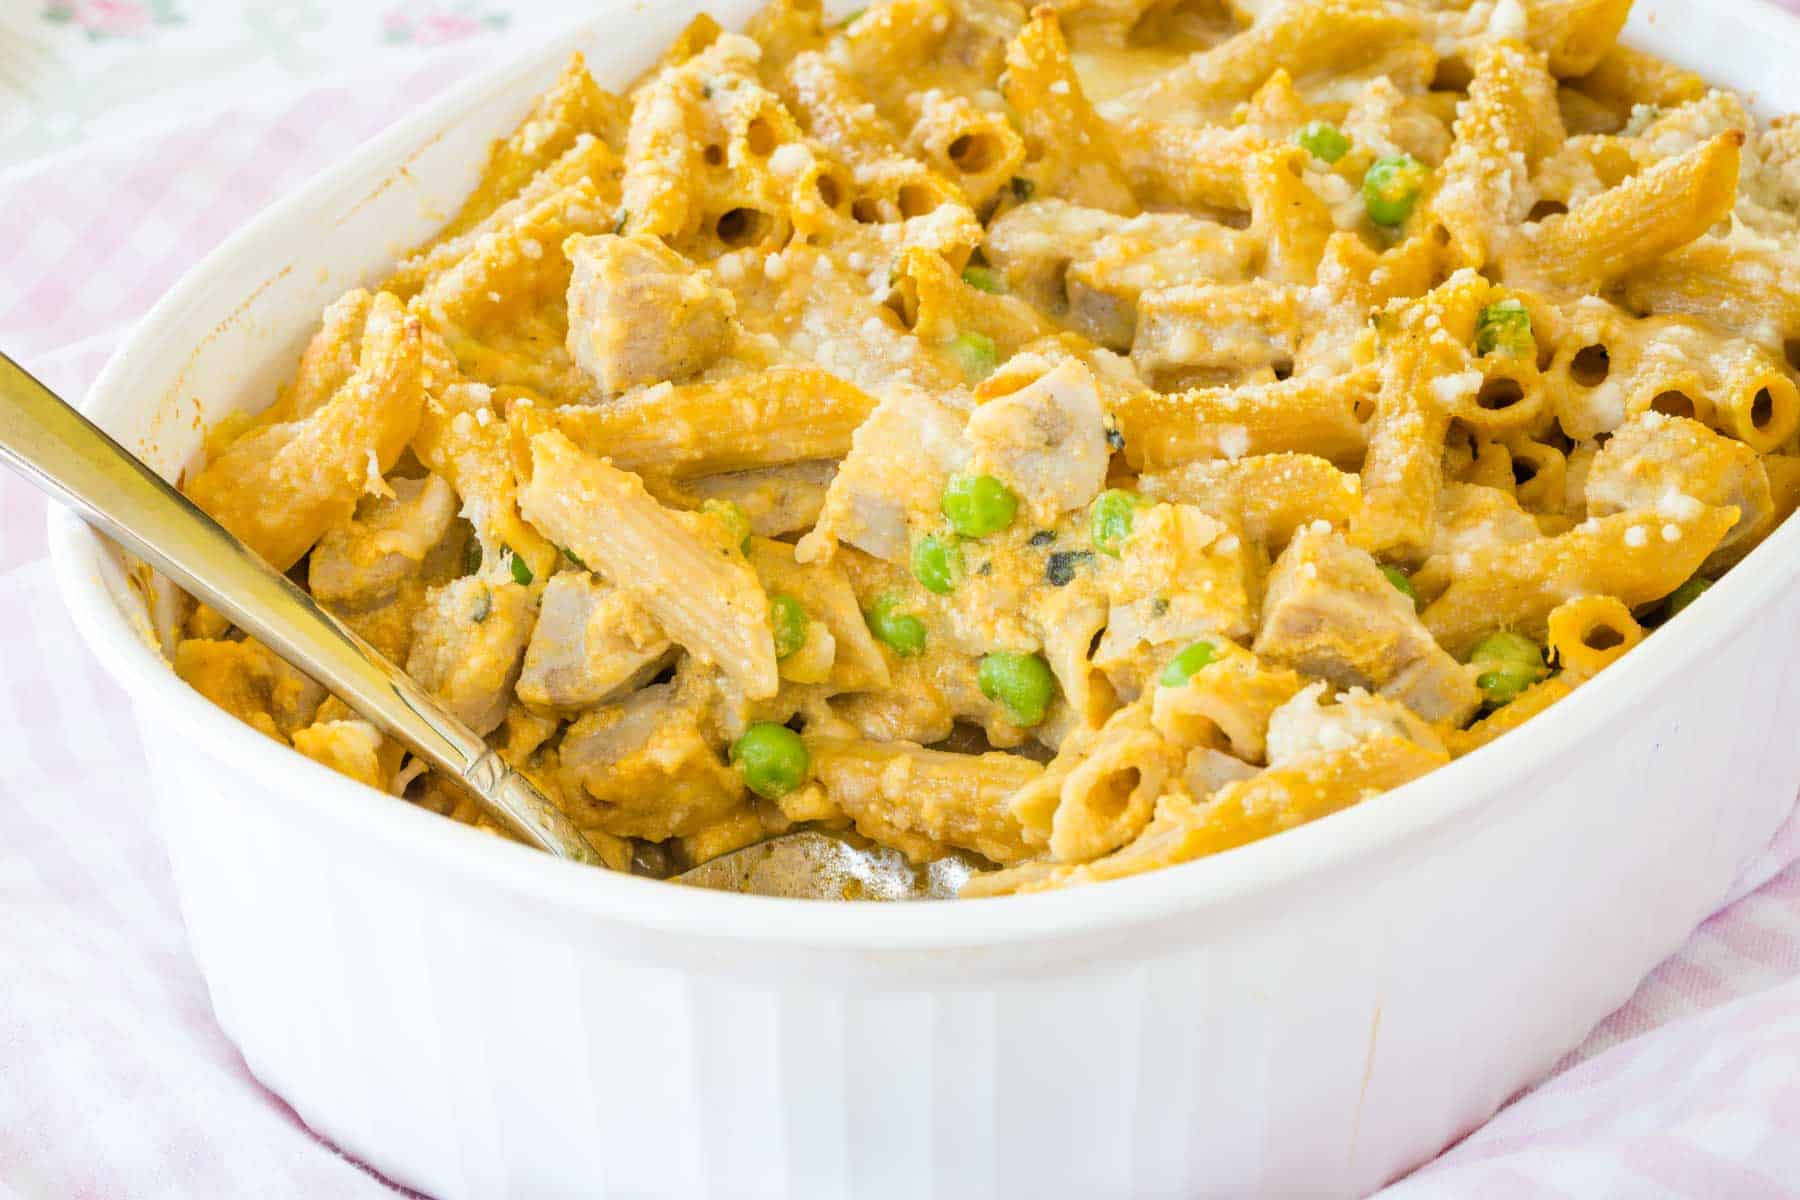 Creamy pumpkin penne with chicken sausage is spooned from a baking dish.